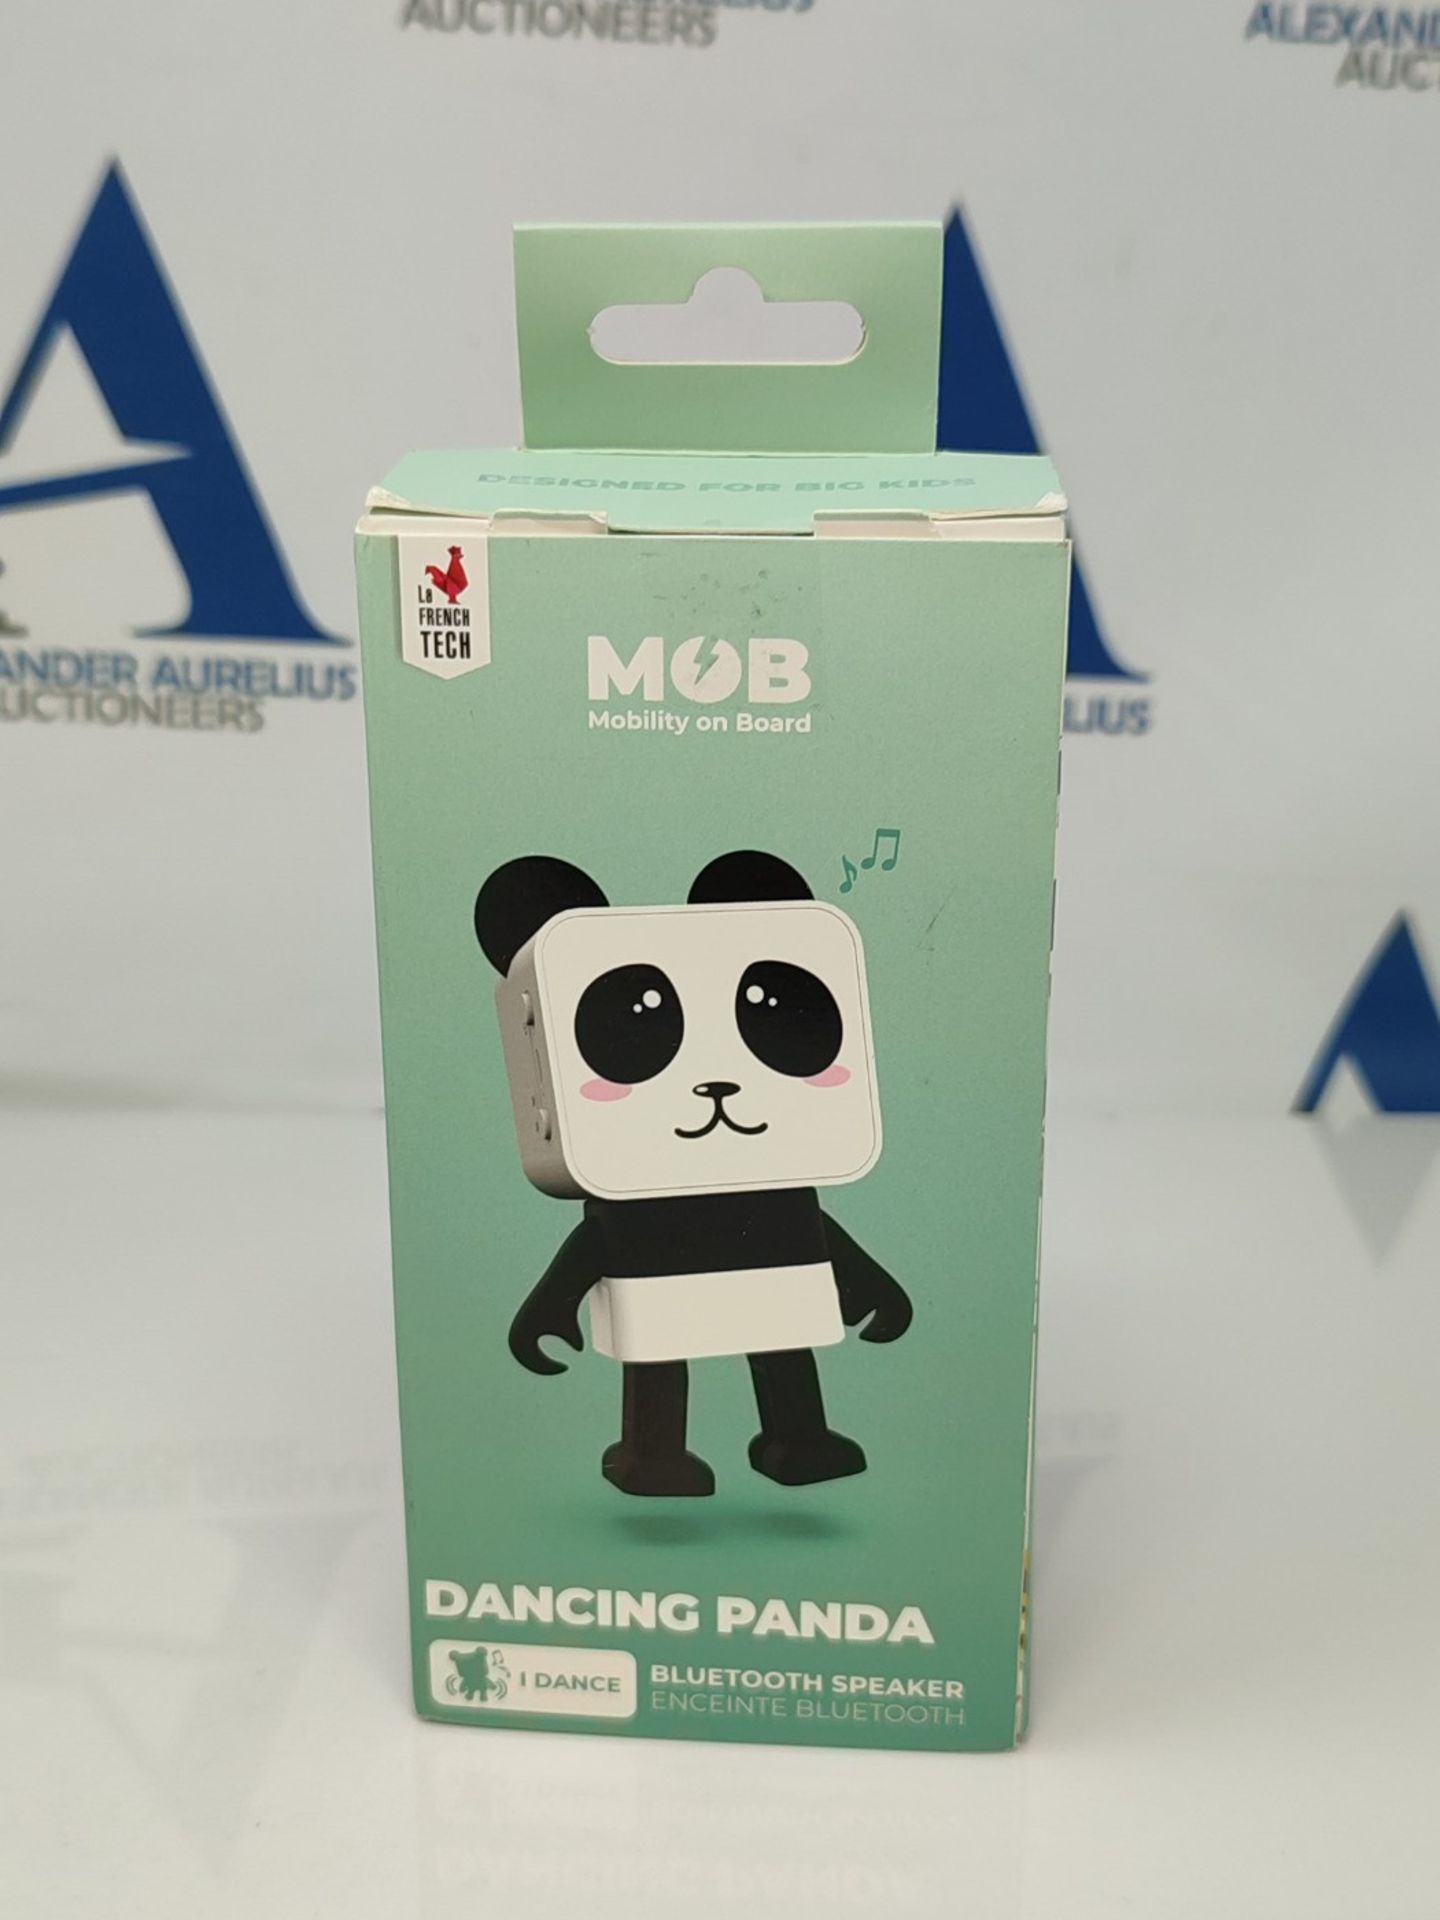 Mobility on Board - Speakers for Animal Dance Party (Panda) - Image 2 of 3